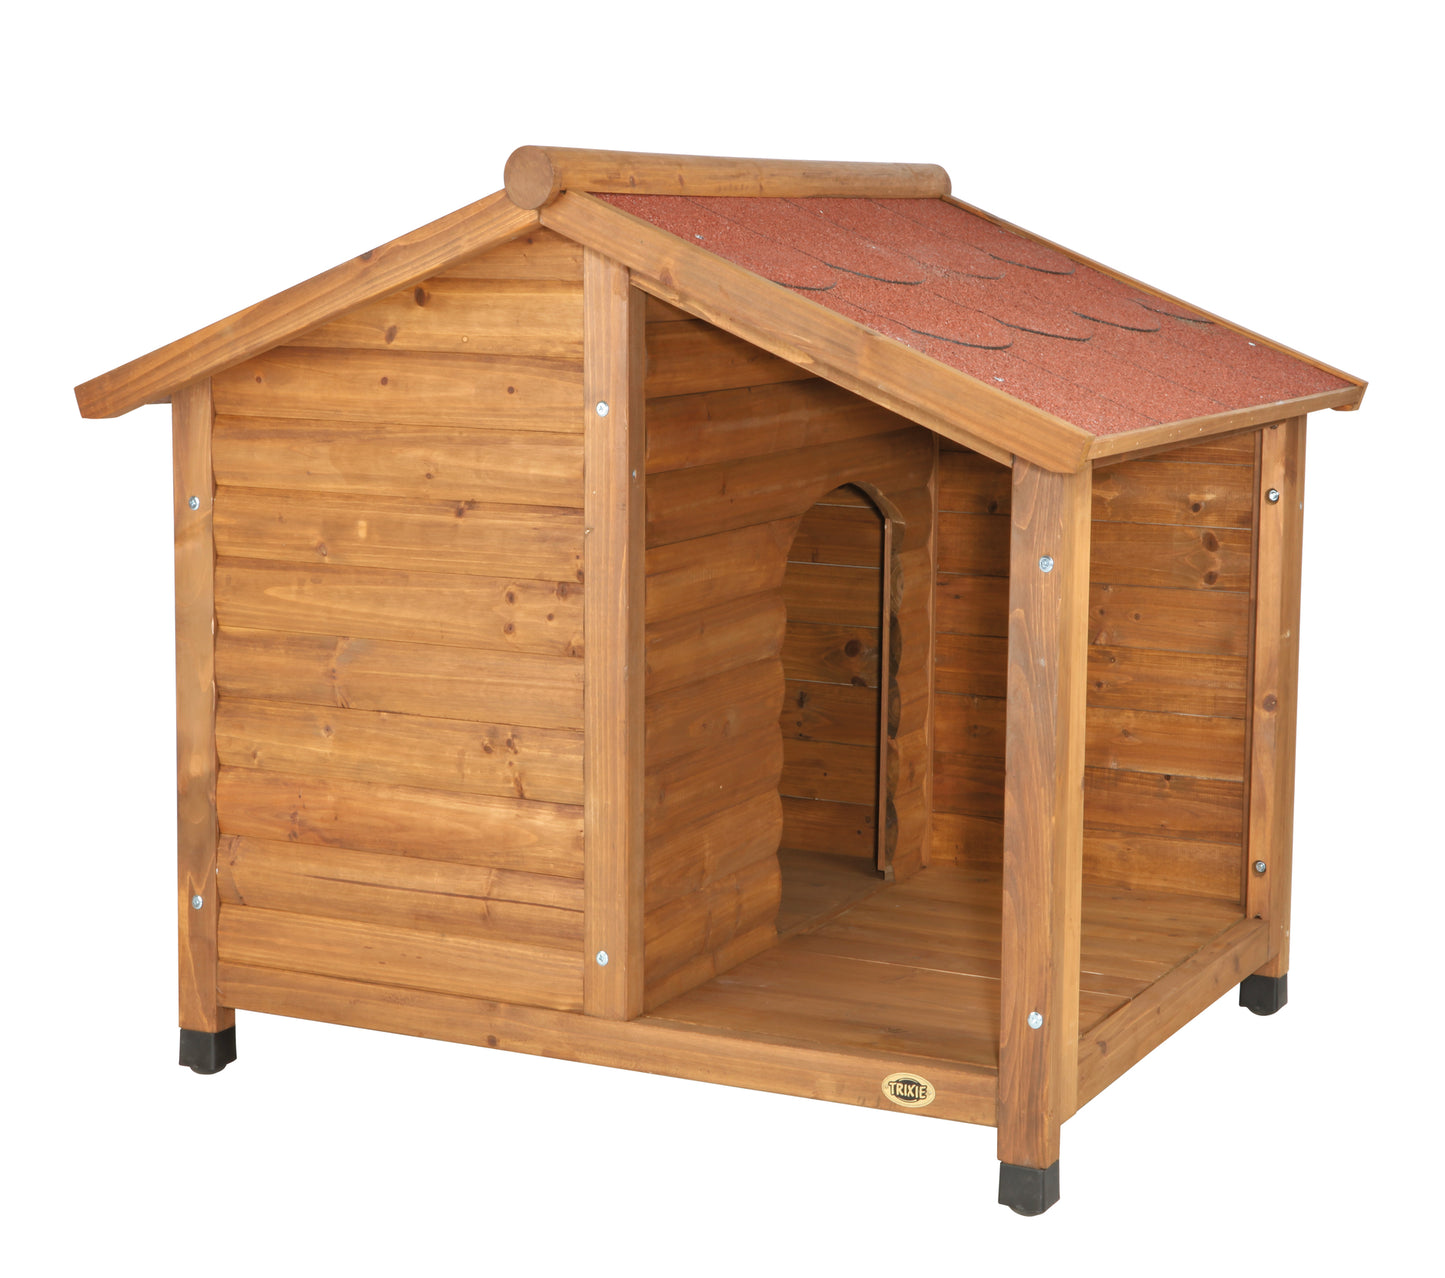 TRIXIE Natura Lodge Dog House, Covered Porch, Hinged Roof, Adjustable Legs, Brown, Small Animals & Pet Supplies > Pet Supplies > Dog Supplies > Dog Houses TRIXIE Large - (51L x 41.25W x 39.25H ")  